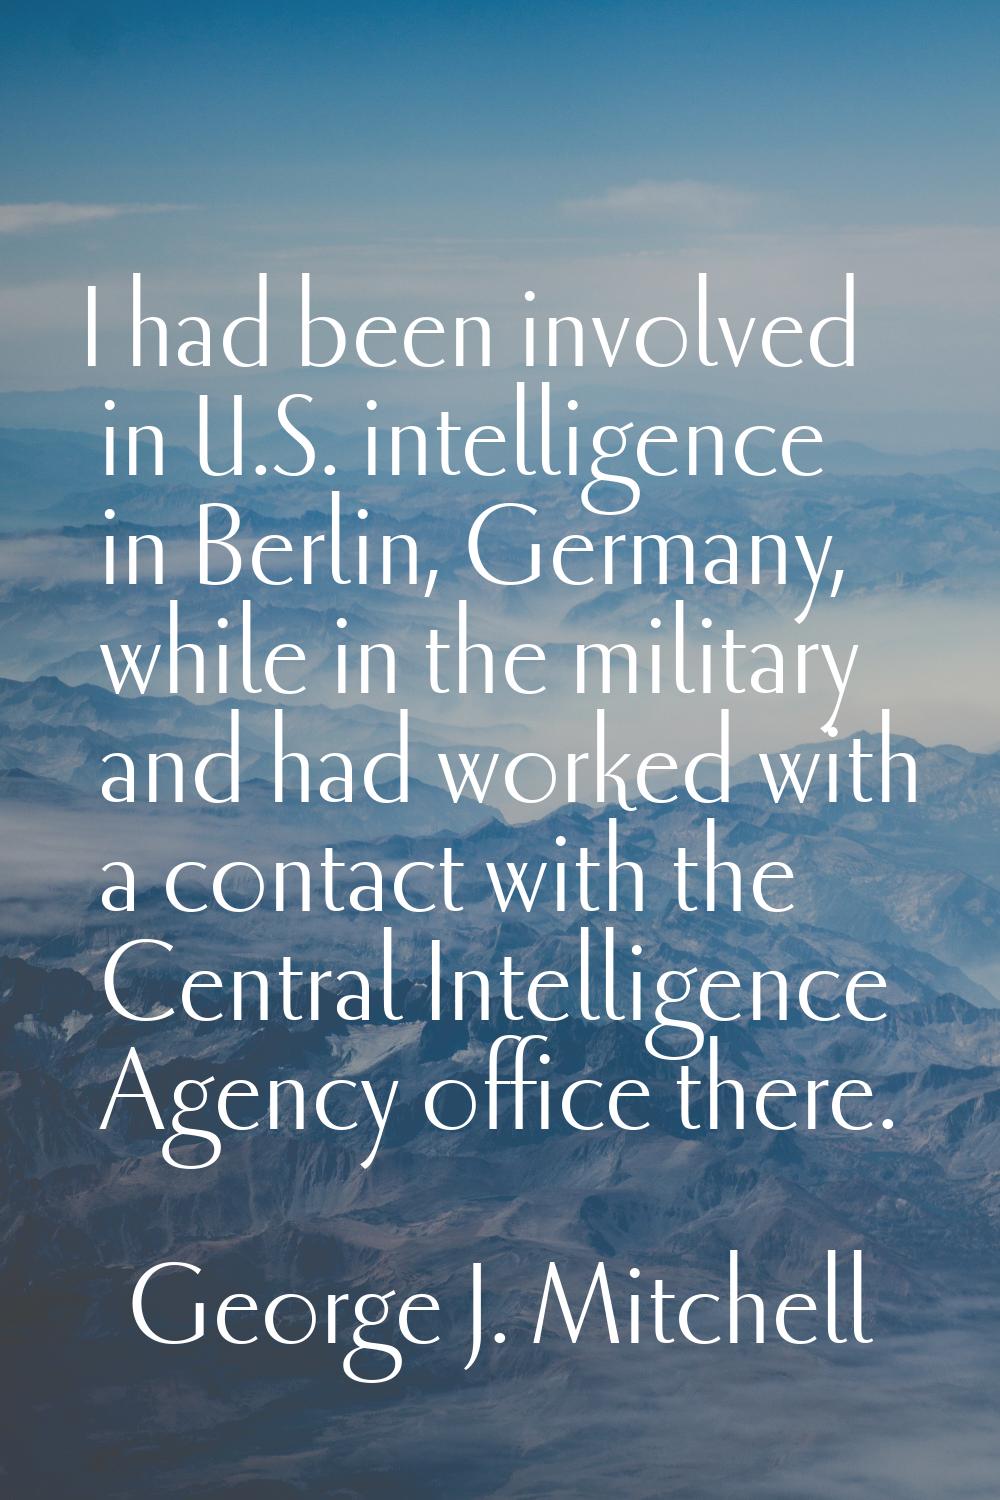 I had been involved in U.S. intelligence in Berlin, Germany, while in the military and had worked w